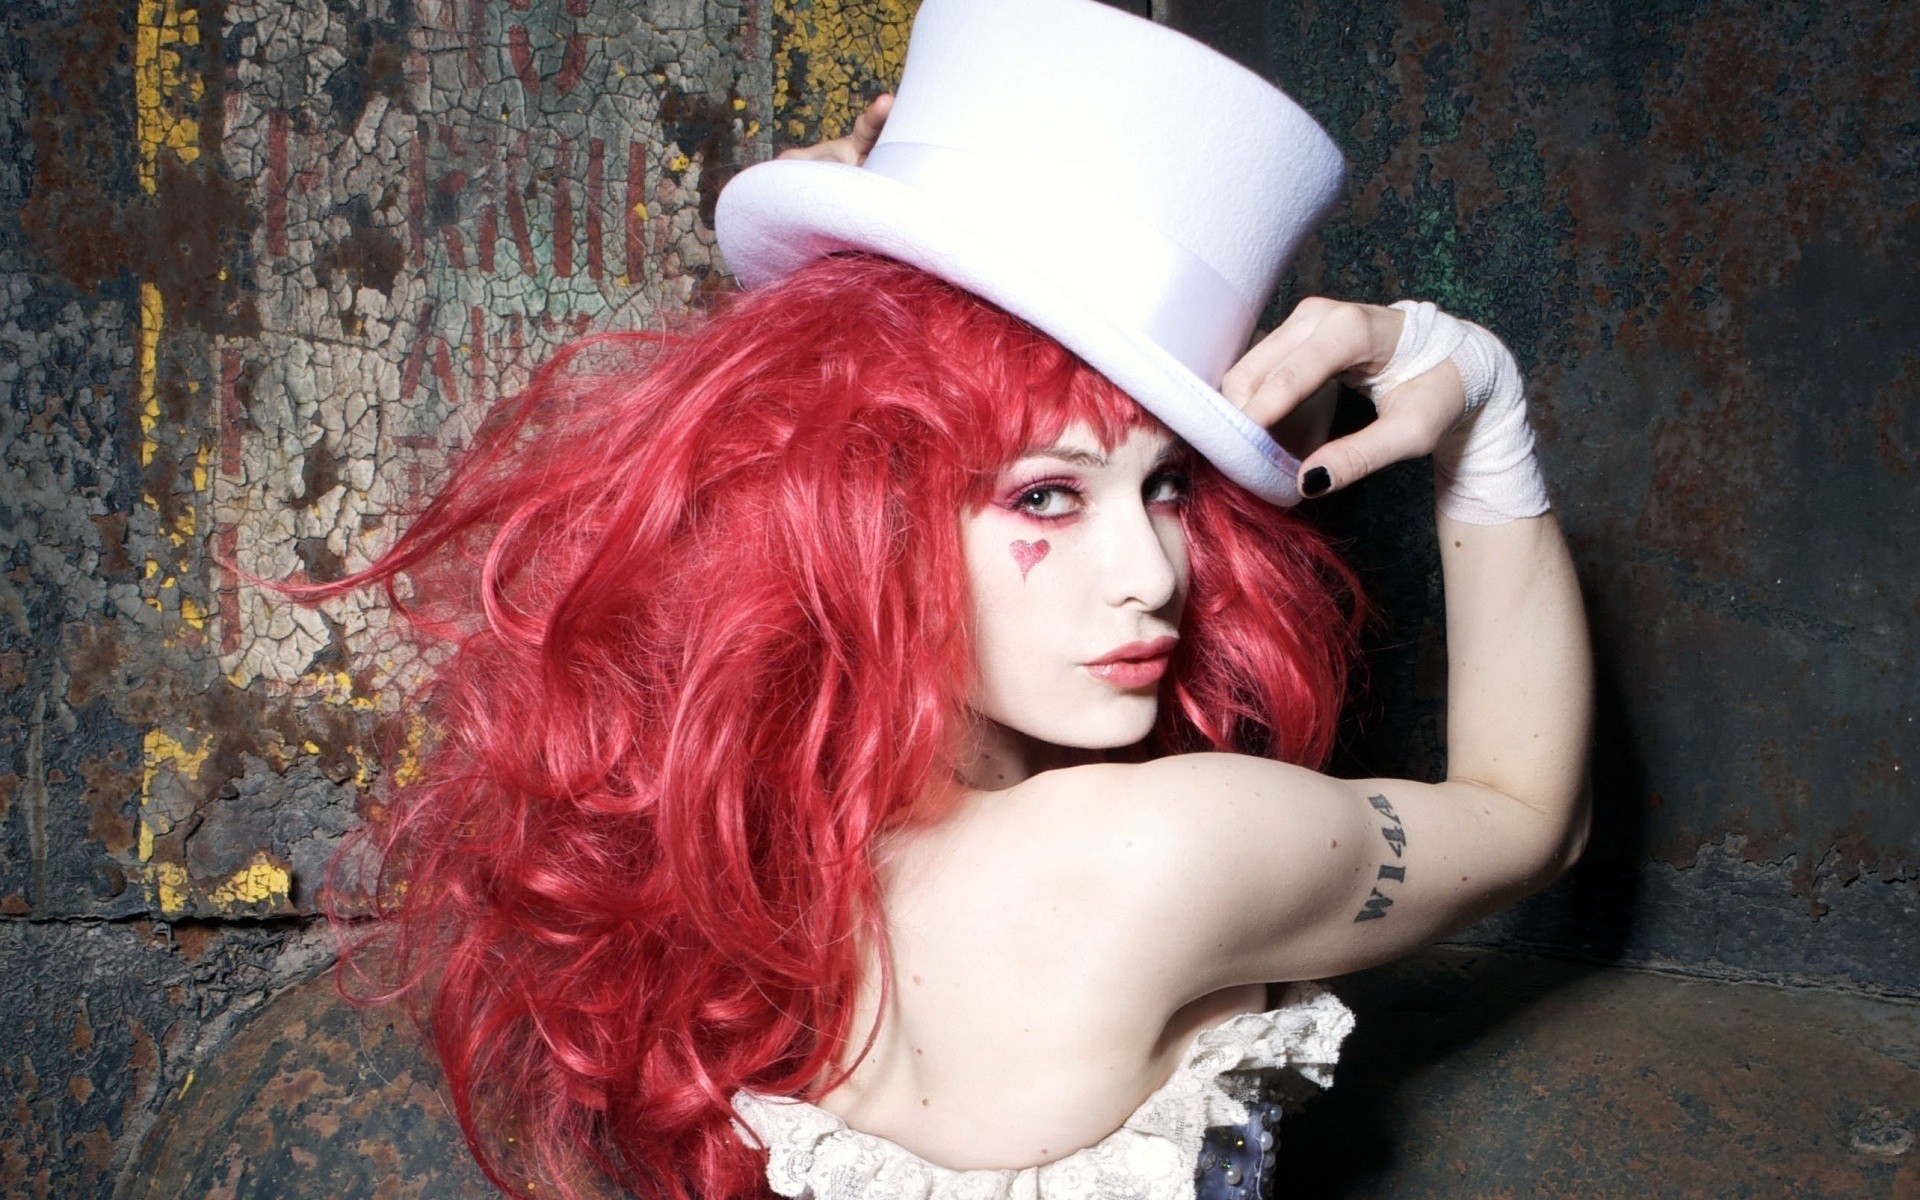 Emilie Autumn Hat Dyed Hair Pink Hair Black Nails Painted Nails Tattoo 1920x1200